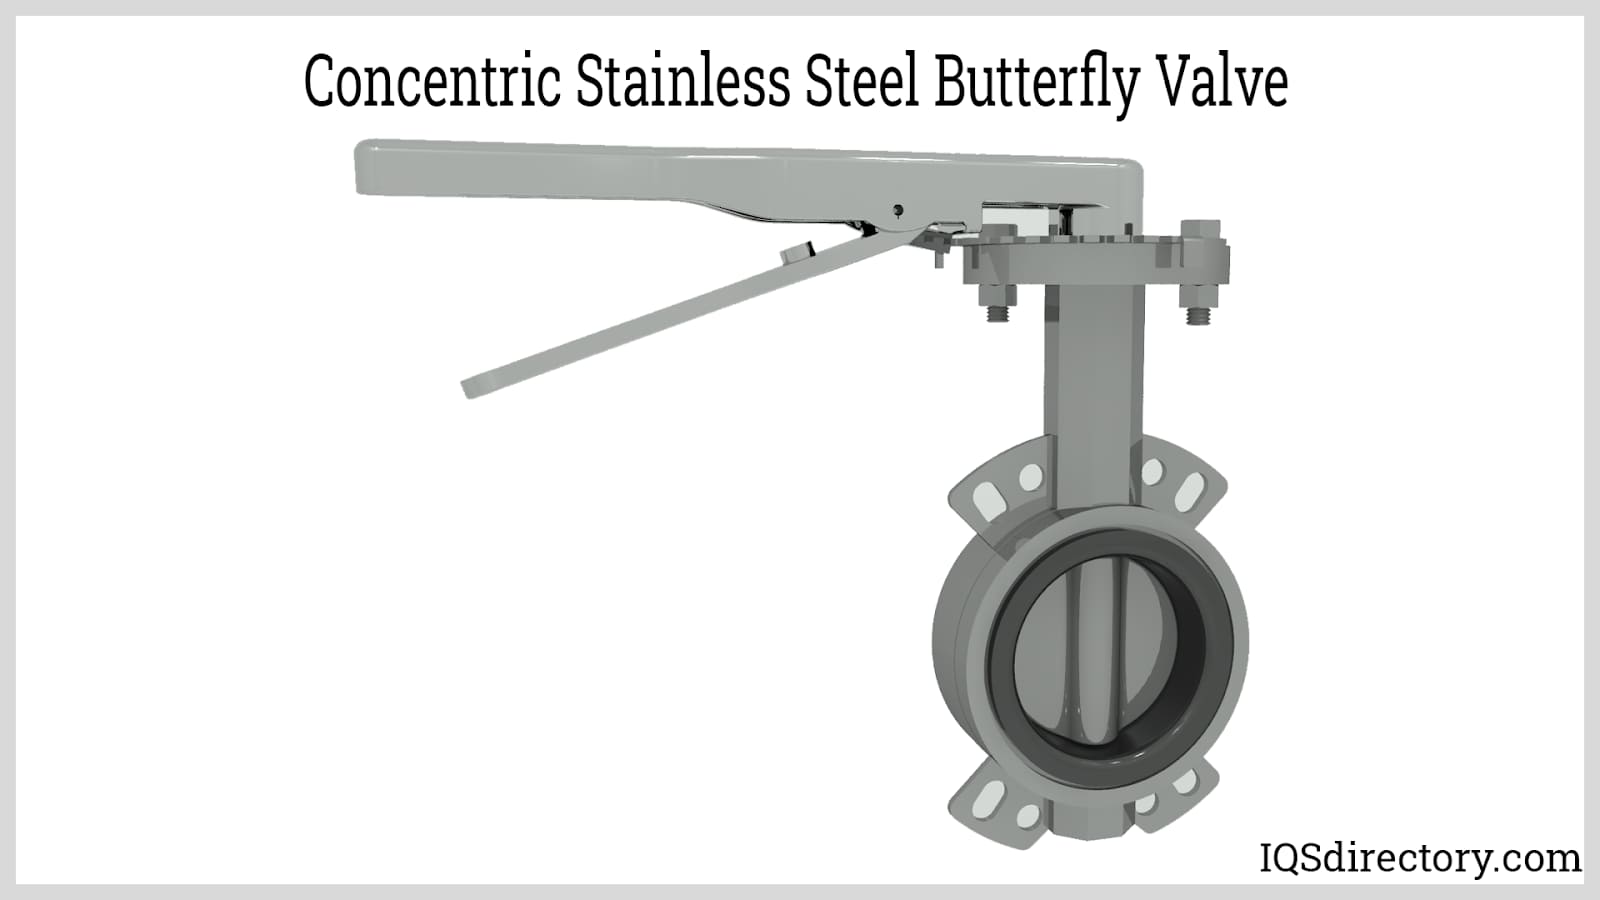 Concentric Stainless Steel Butterfly Valve